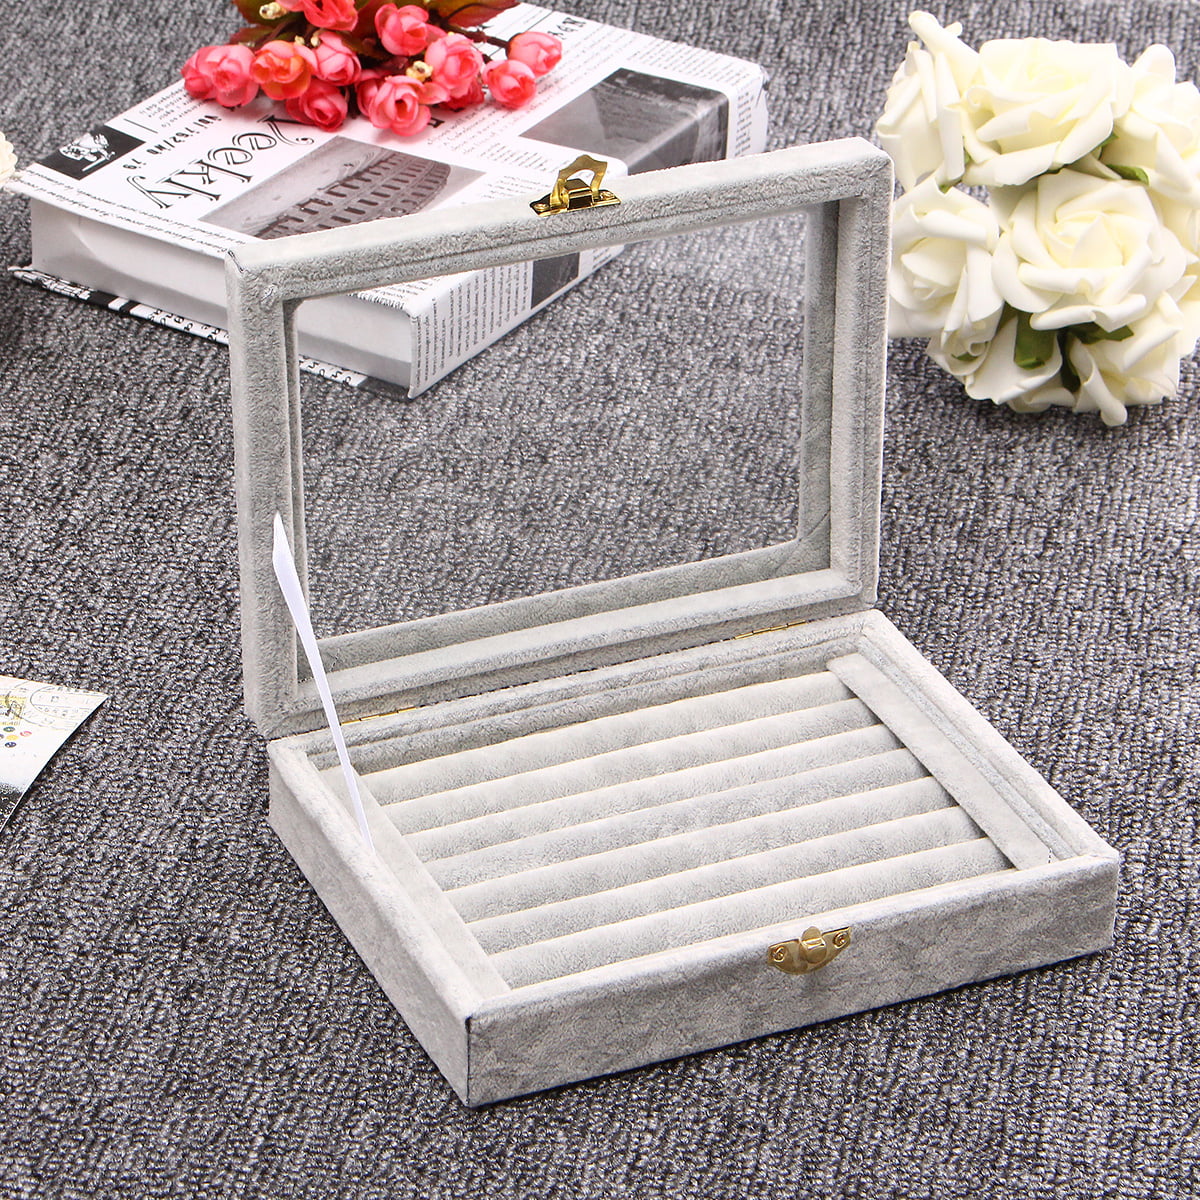 Details about   Jewelry Organizer 2pcs Jewelry Storage Rack for Jewelry Stores Boutiques 